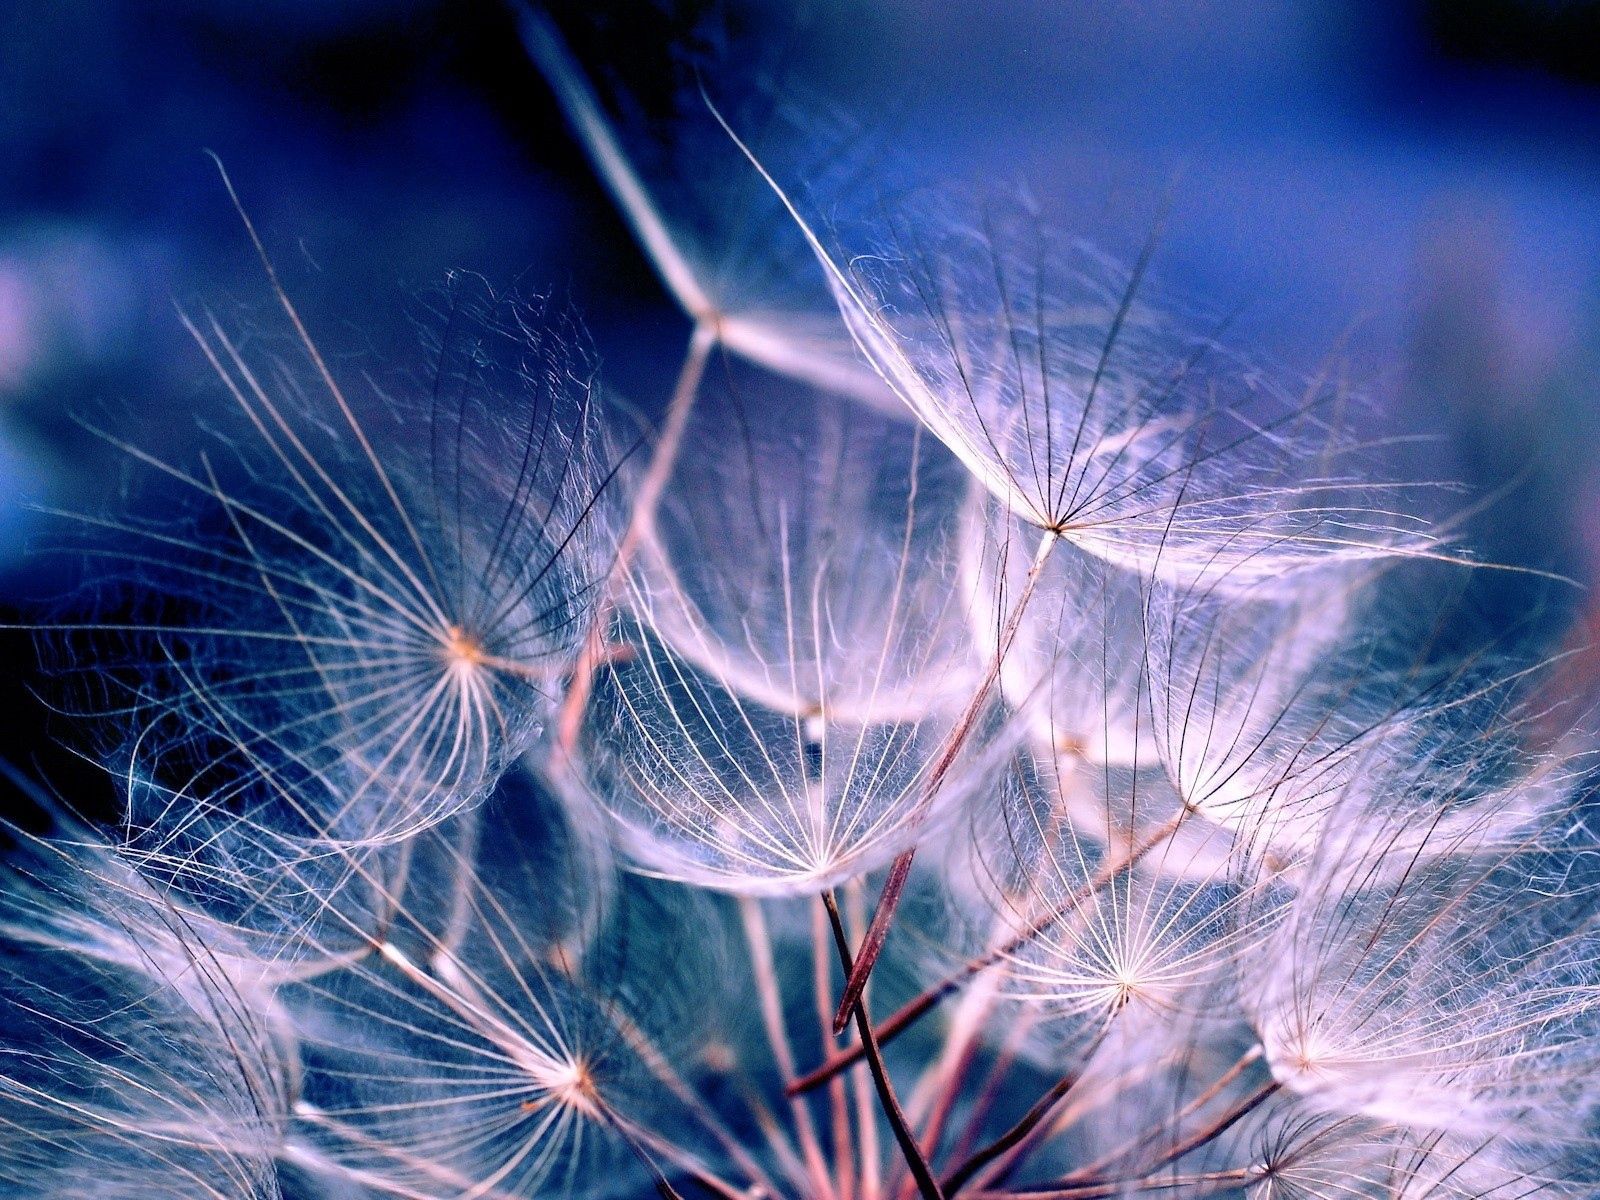 dandelion, white, macro, fuzz, fluff, air, seeds, seed, aerial High Definition image